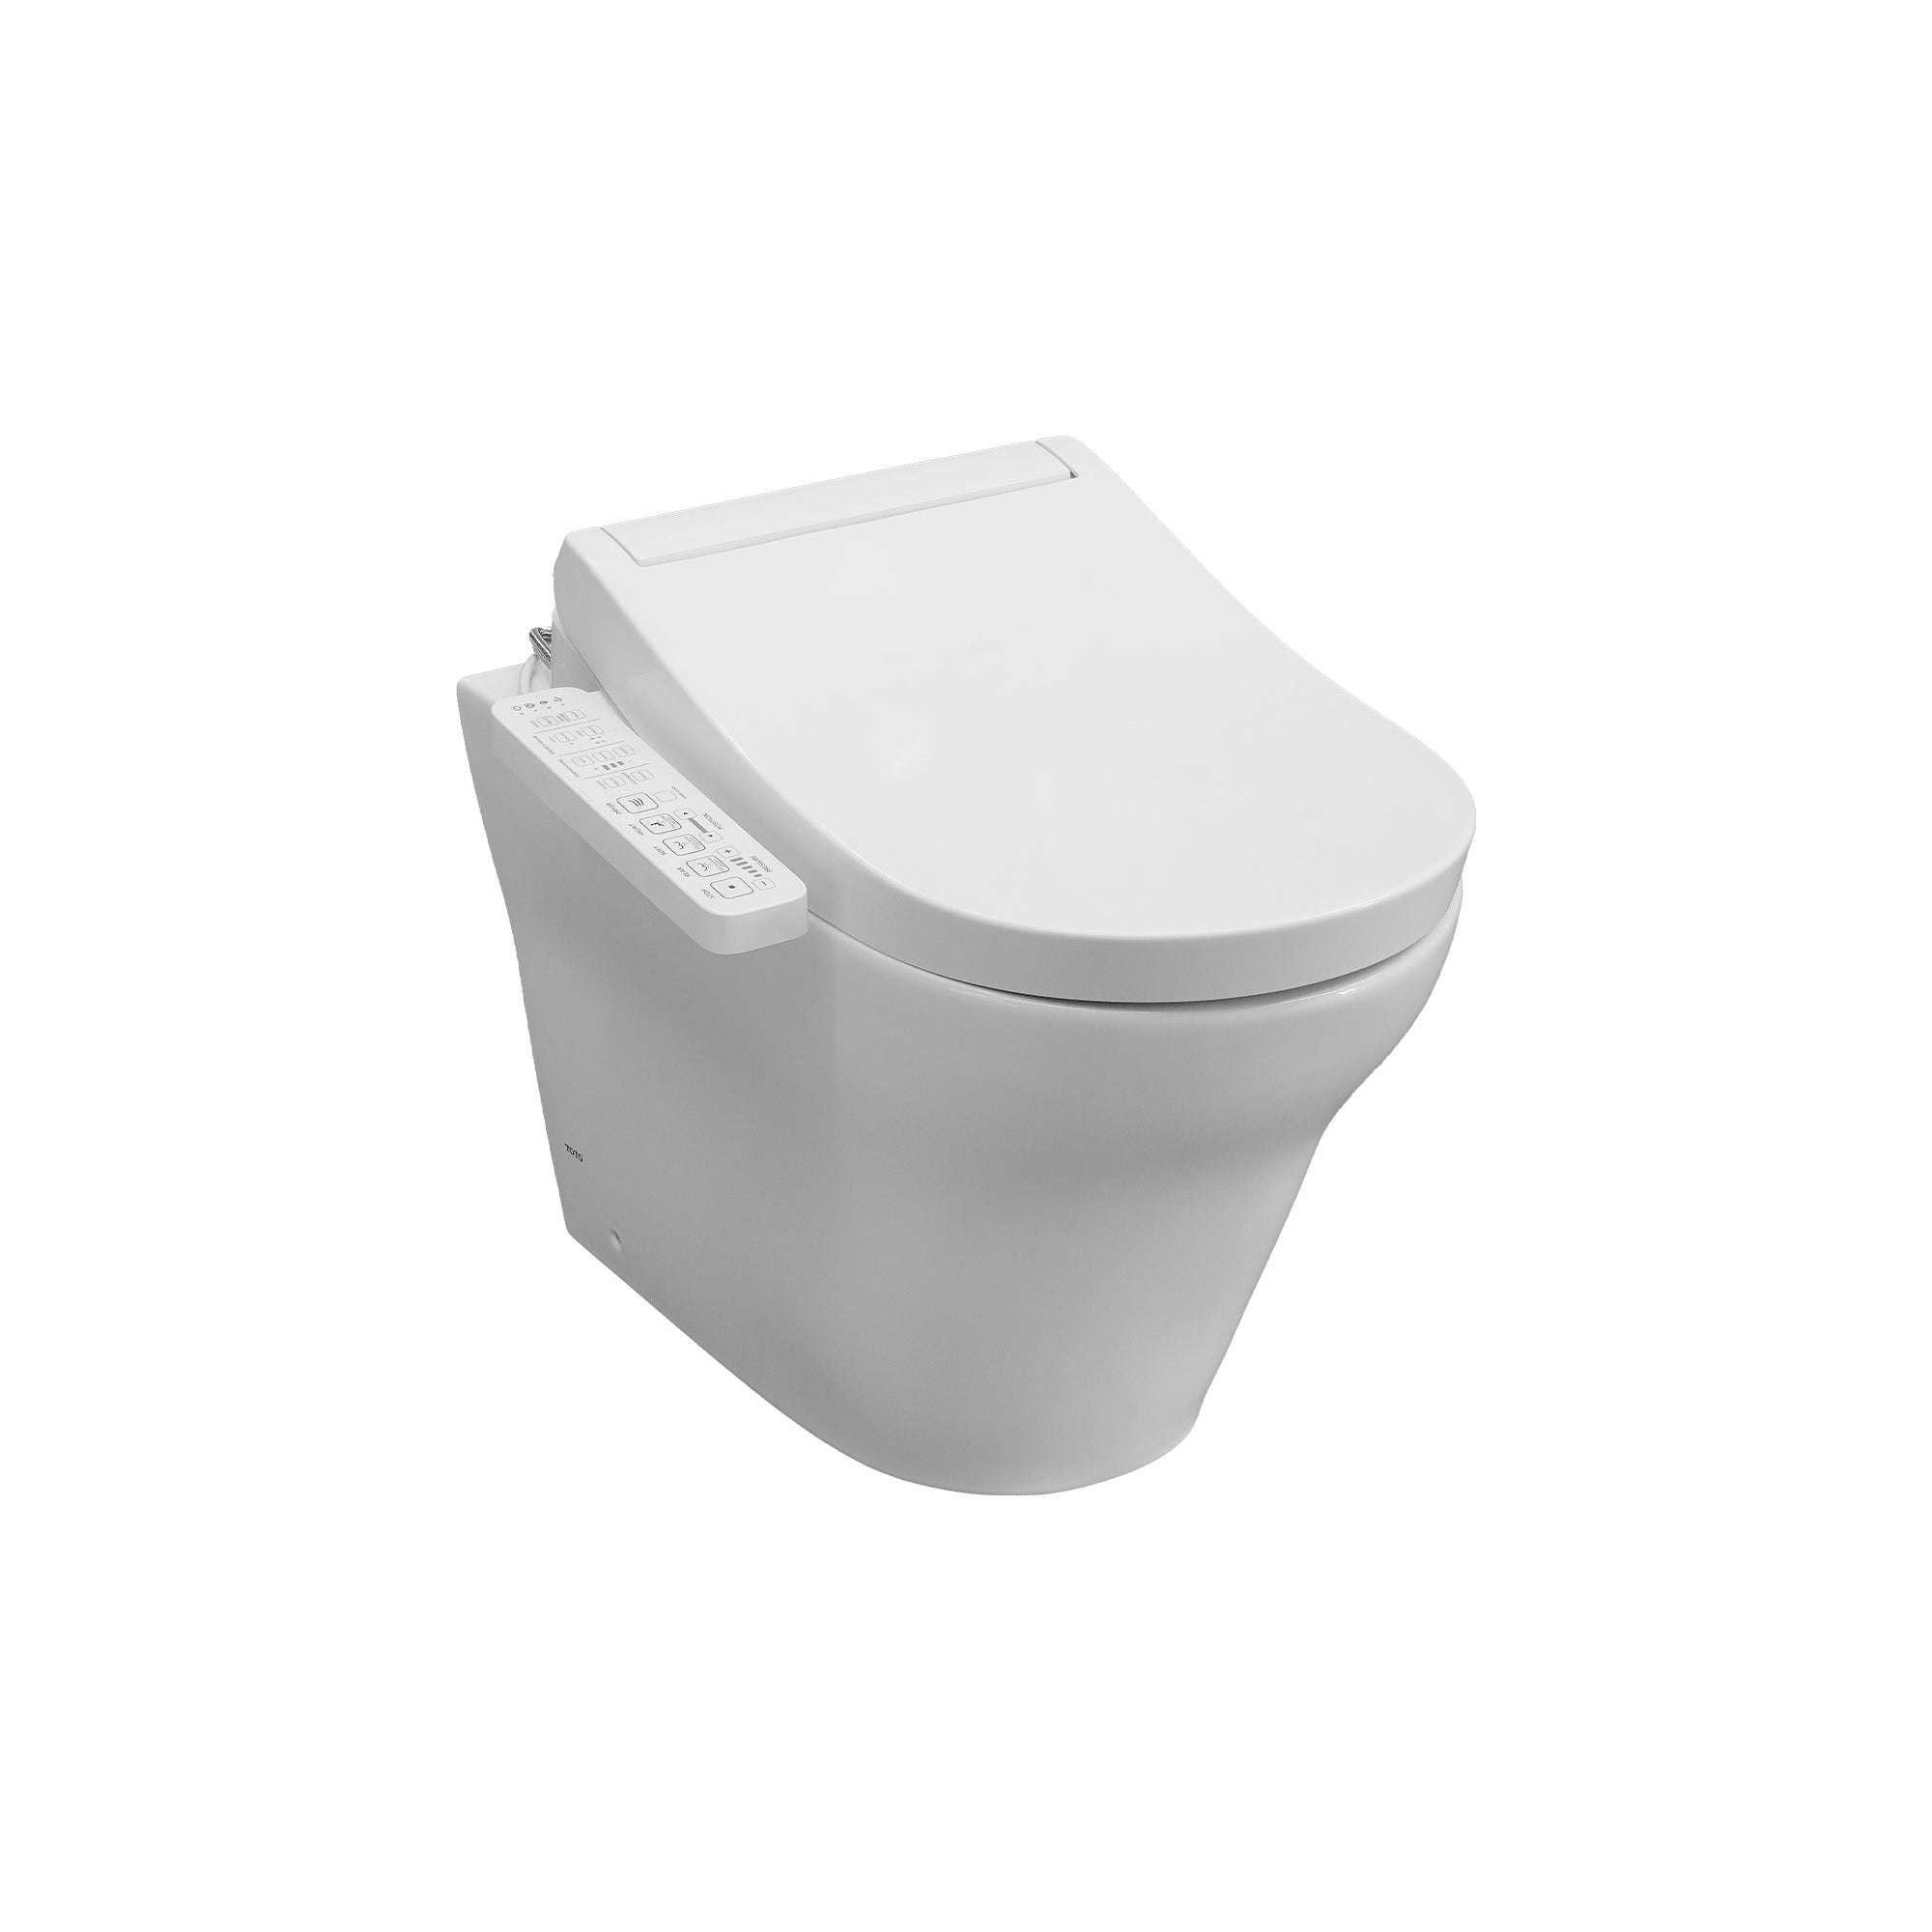 TOTO MH WALL FACED TOILET AND S2 WASHLET W/ SIDE CONTROL PACKAGE D-SHAPED GLOSS WHITE